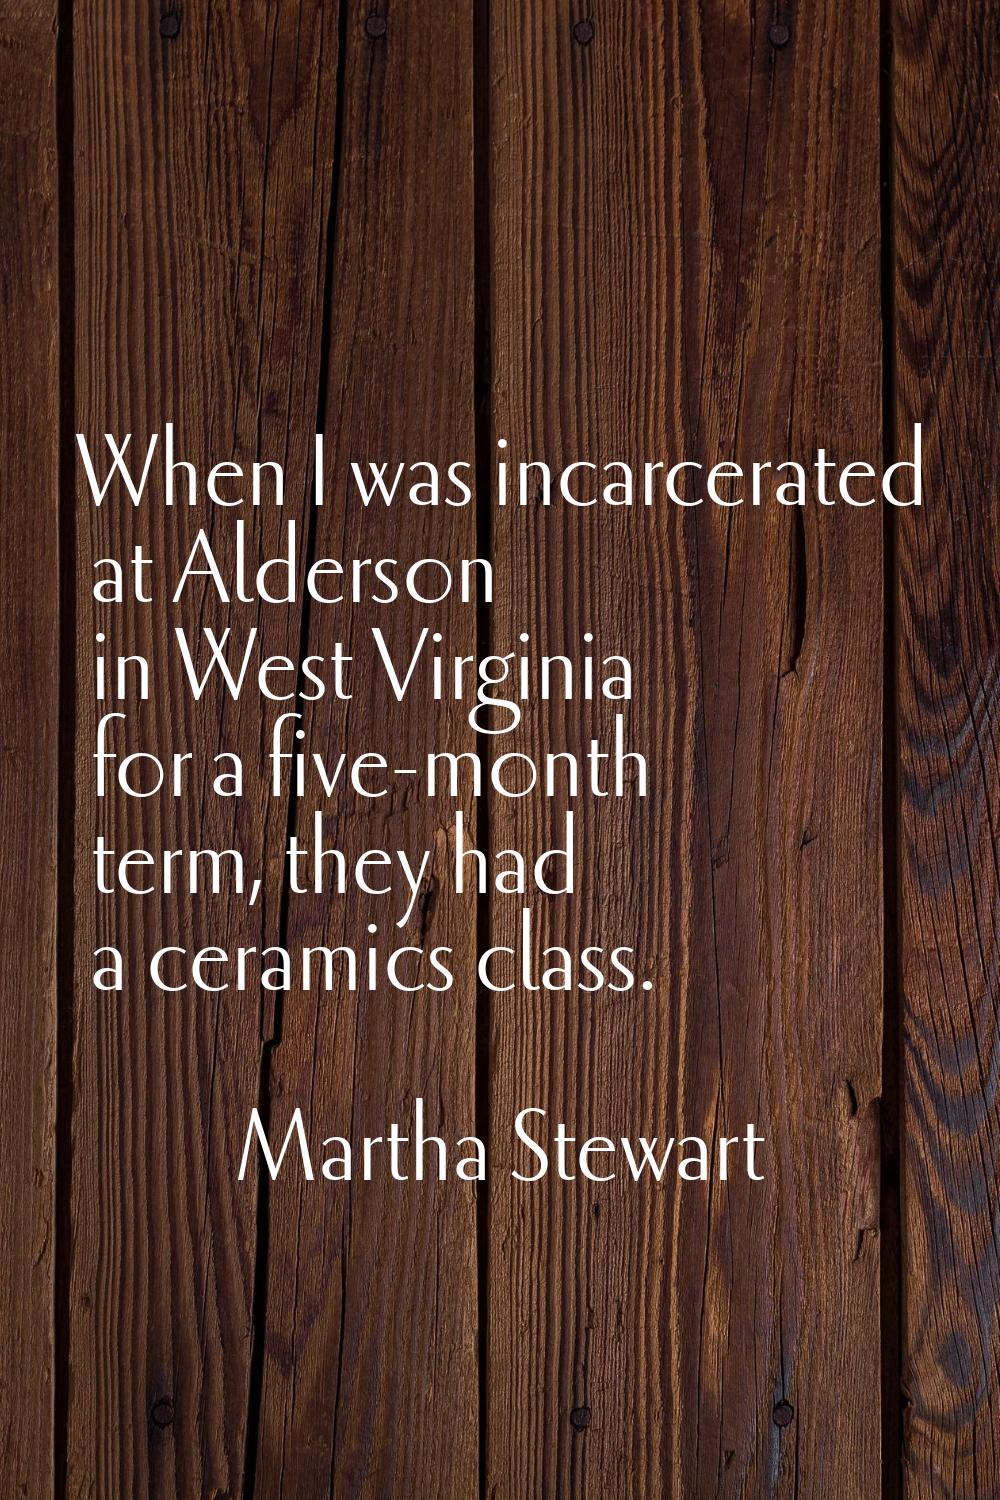 When I was incarcerated at Alderson in West Virginia for a five-month term, they had a ceramics cla